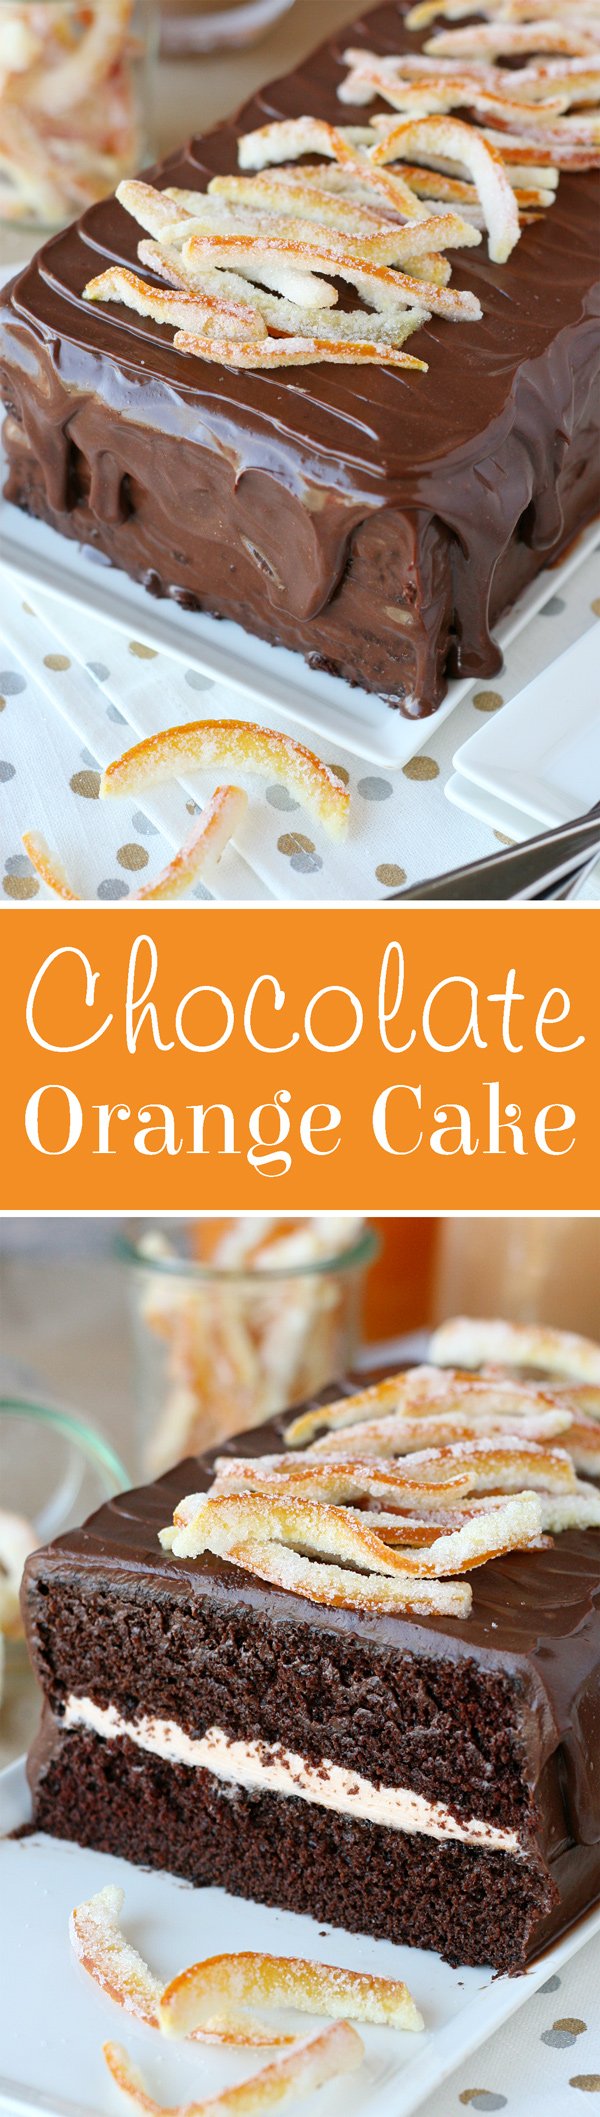 This Chocolate Orange Cake is rich, moist, flavorful and simply gorgeous!